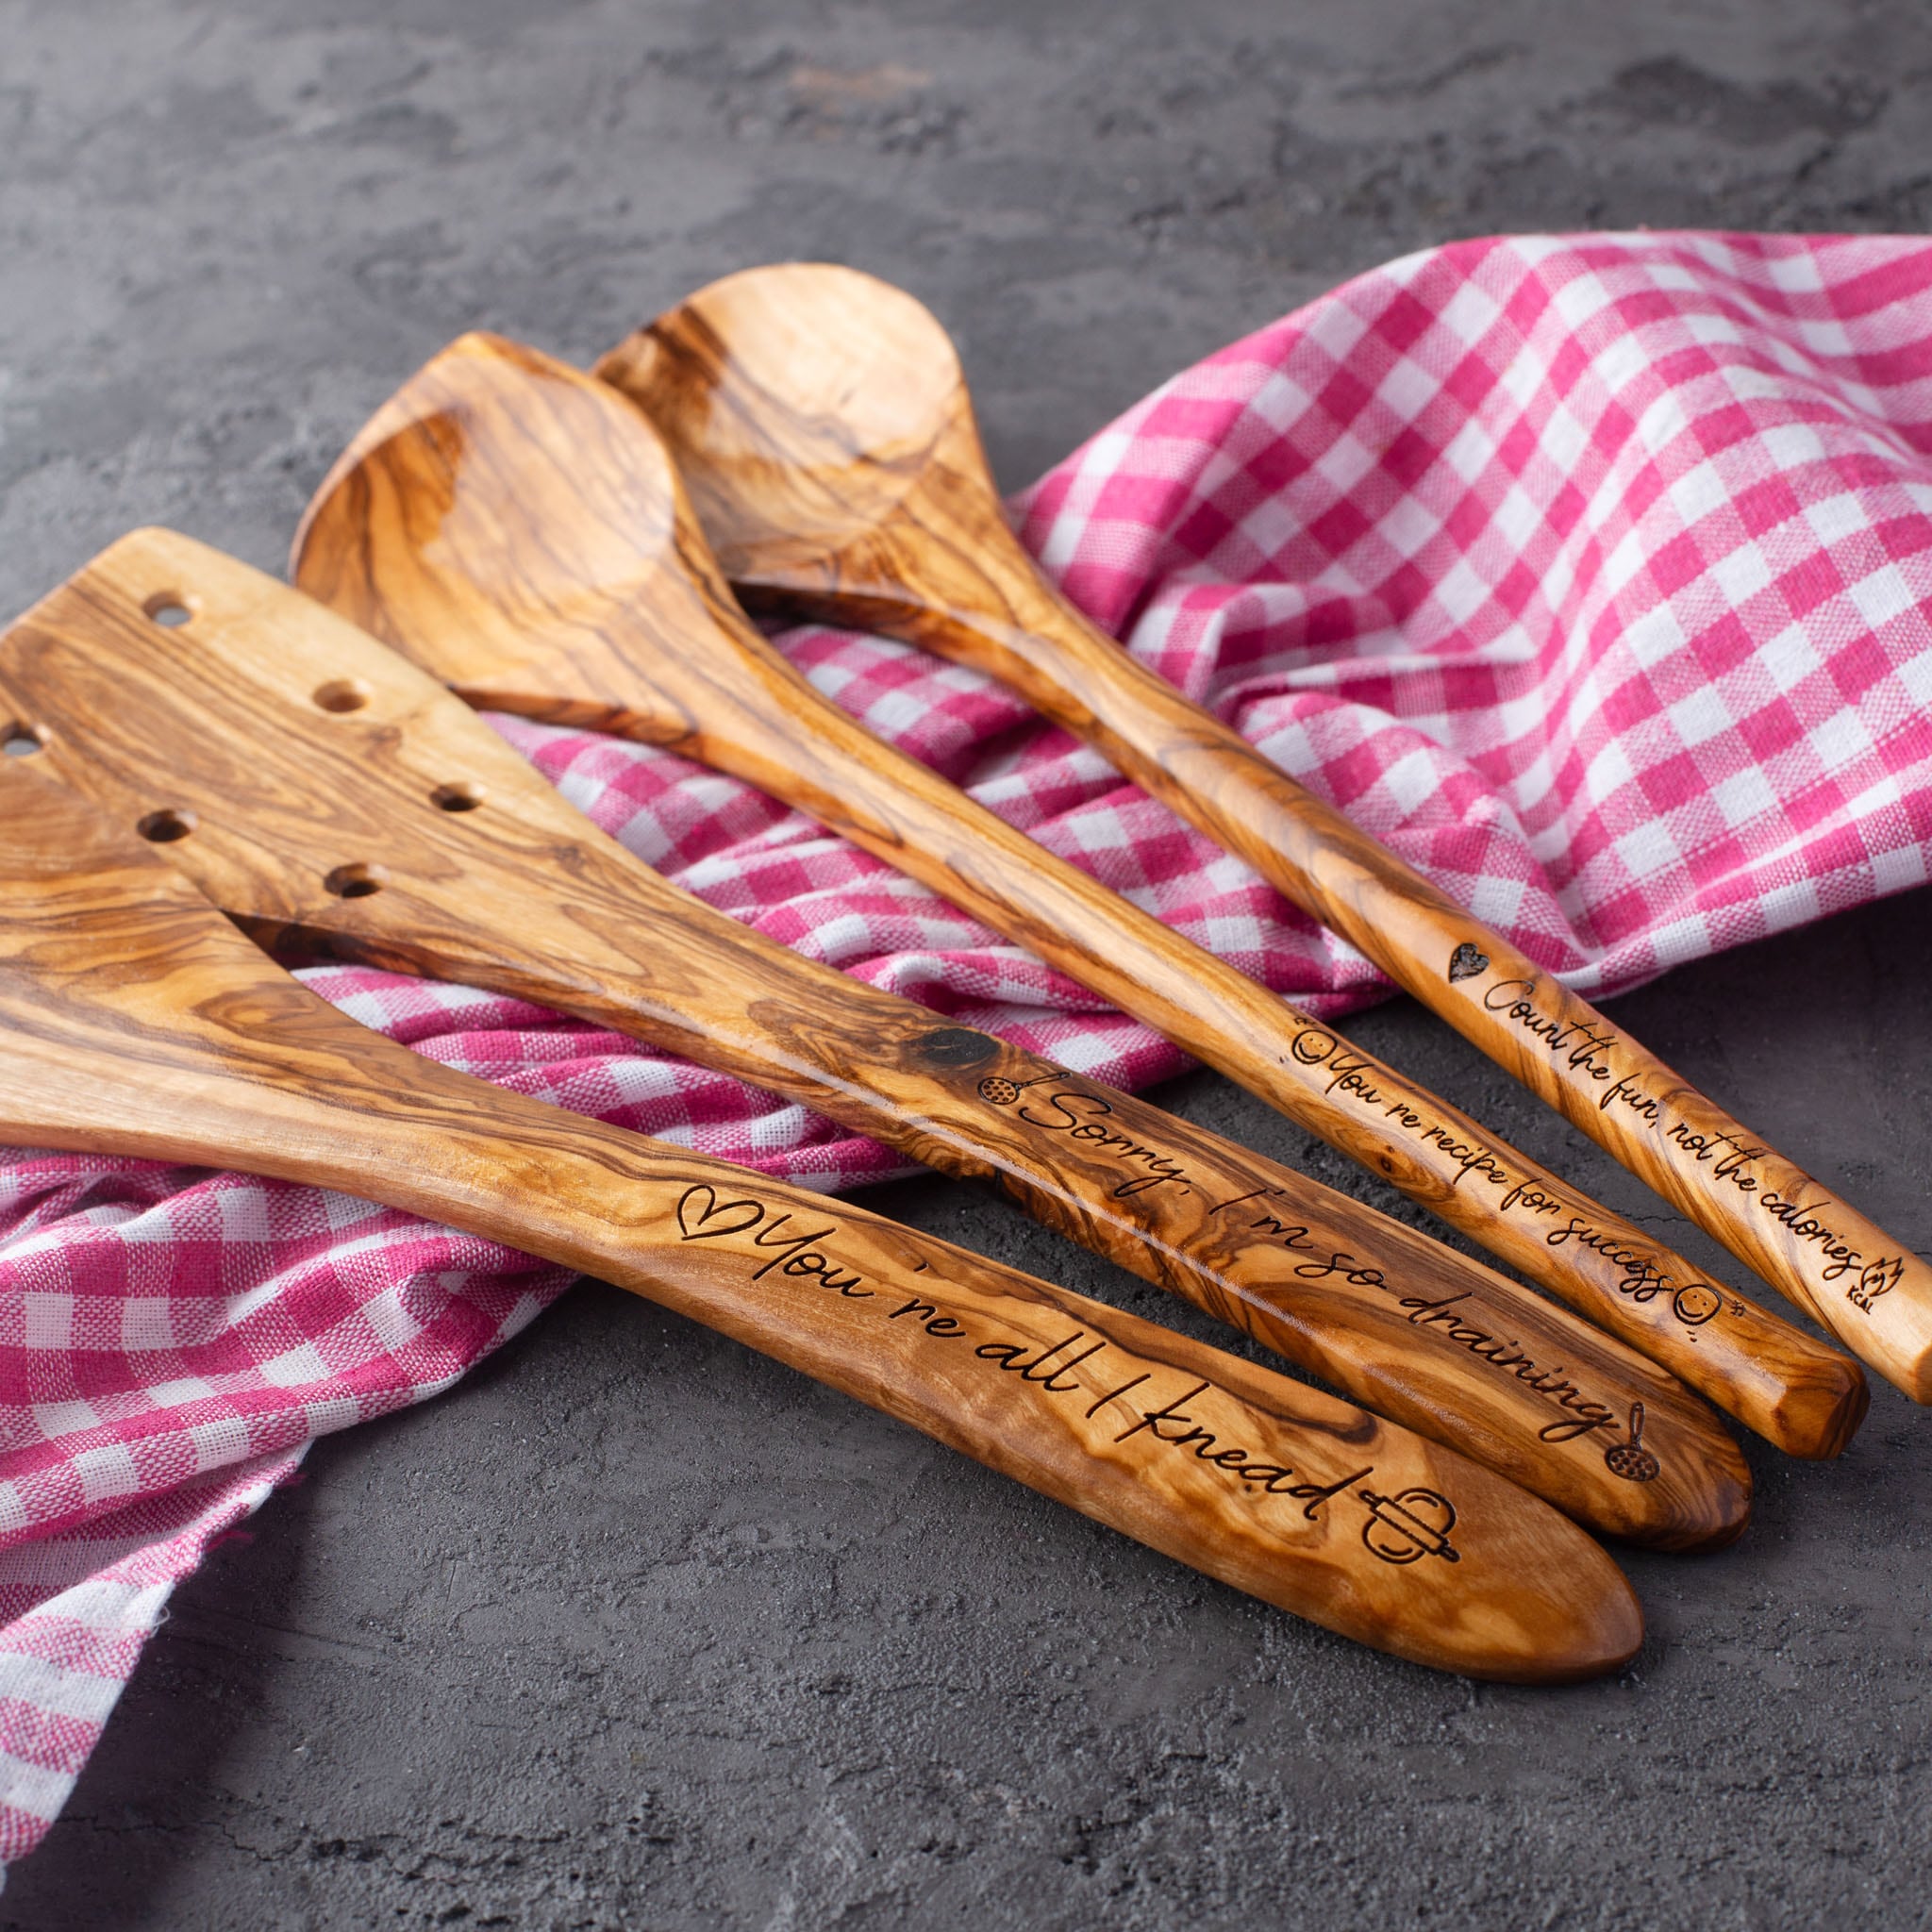 Five wooden cooking spoons with engraved messages, resting on a pink and white checkered cloth on a dark surface.